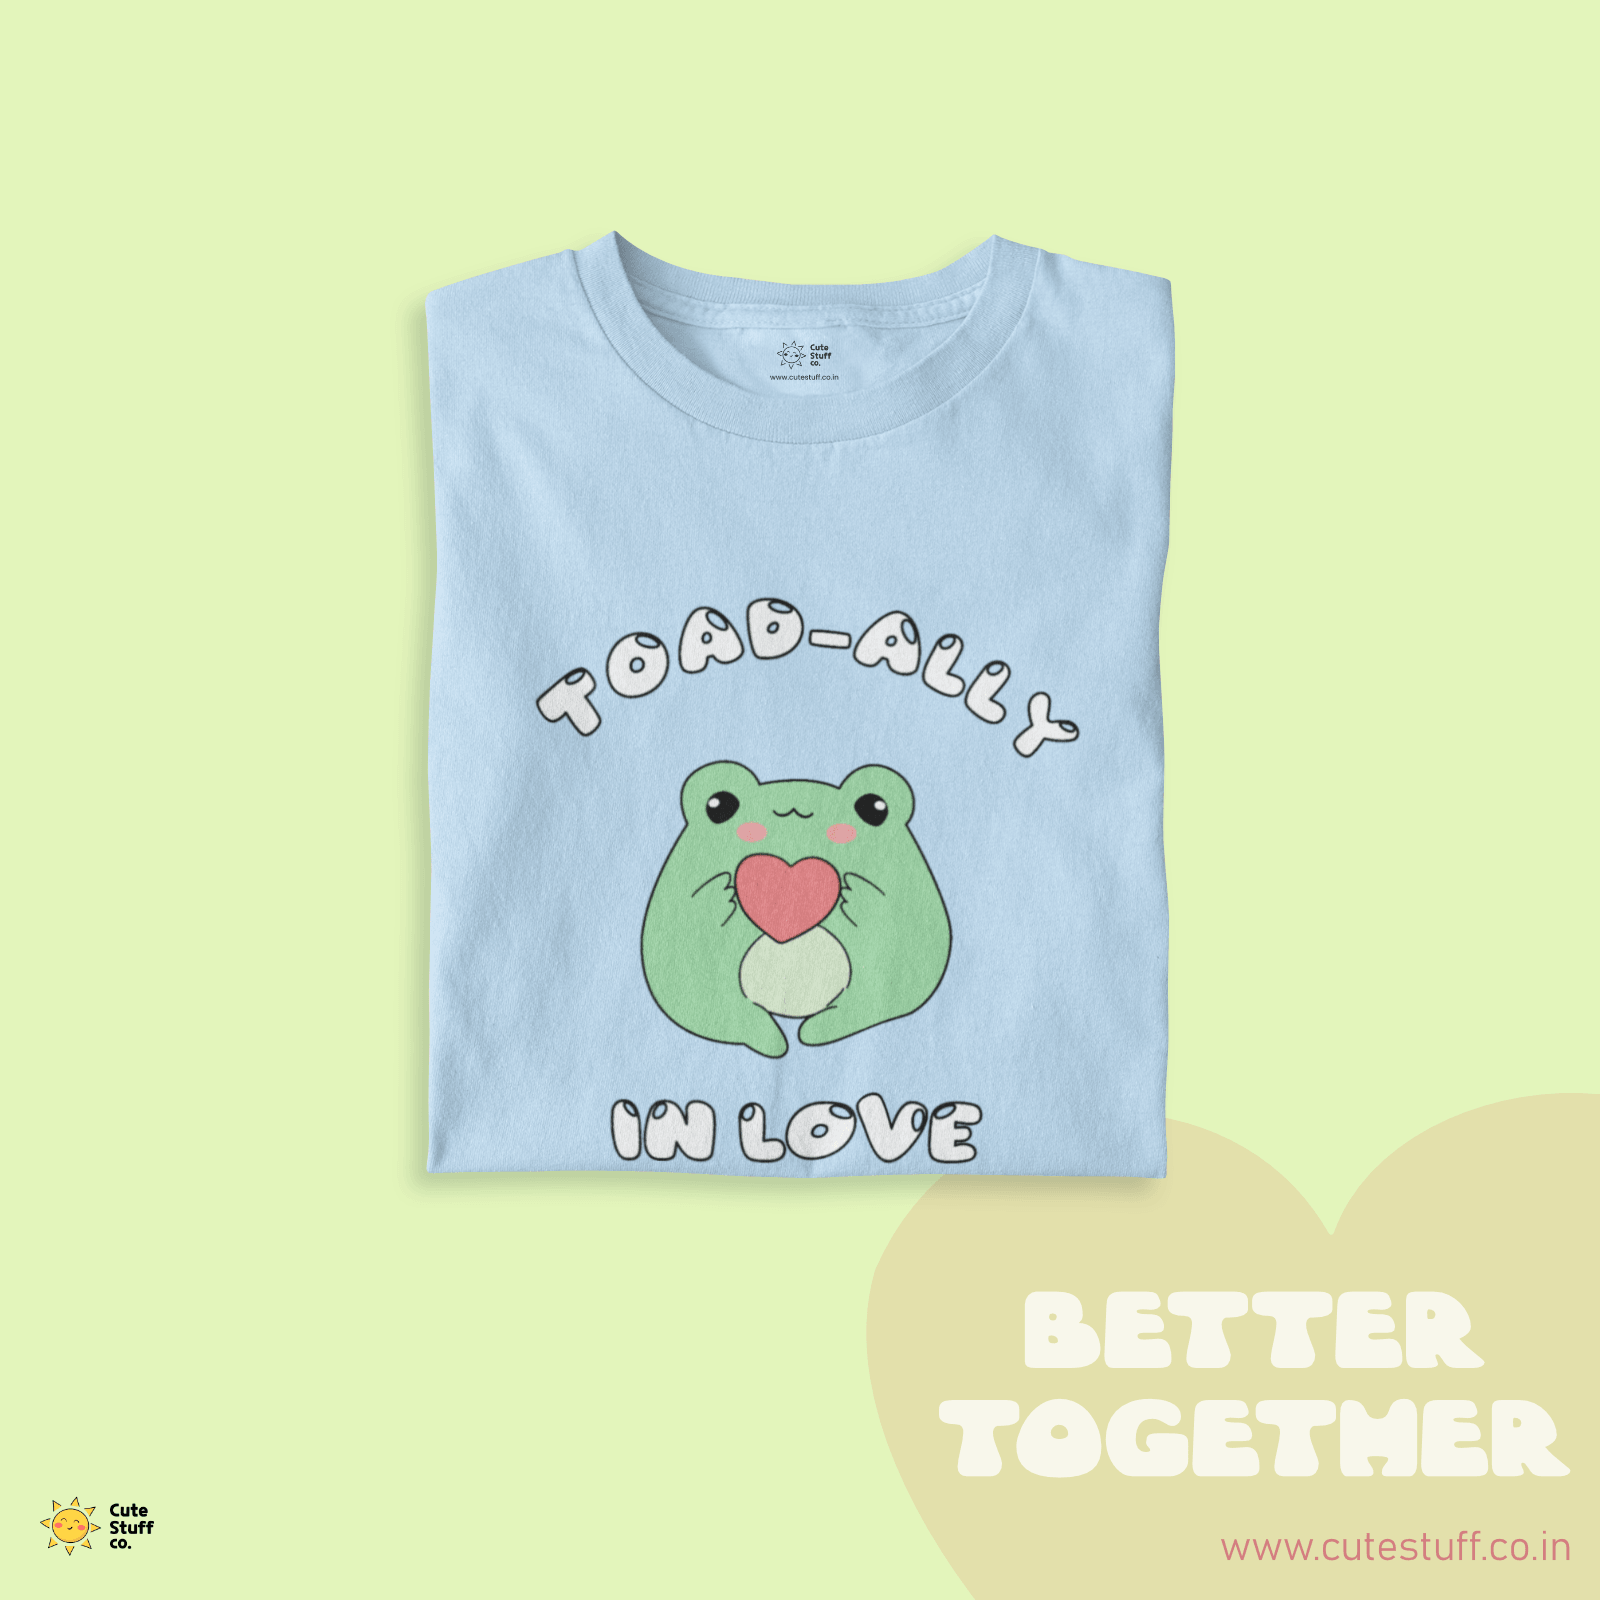 Toadally In Love Oversized T-shirts - Better Together